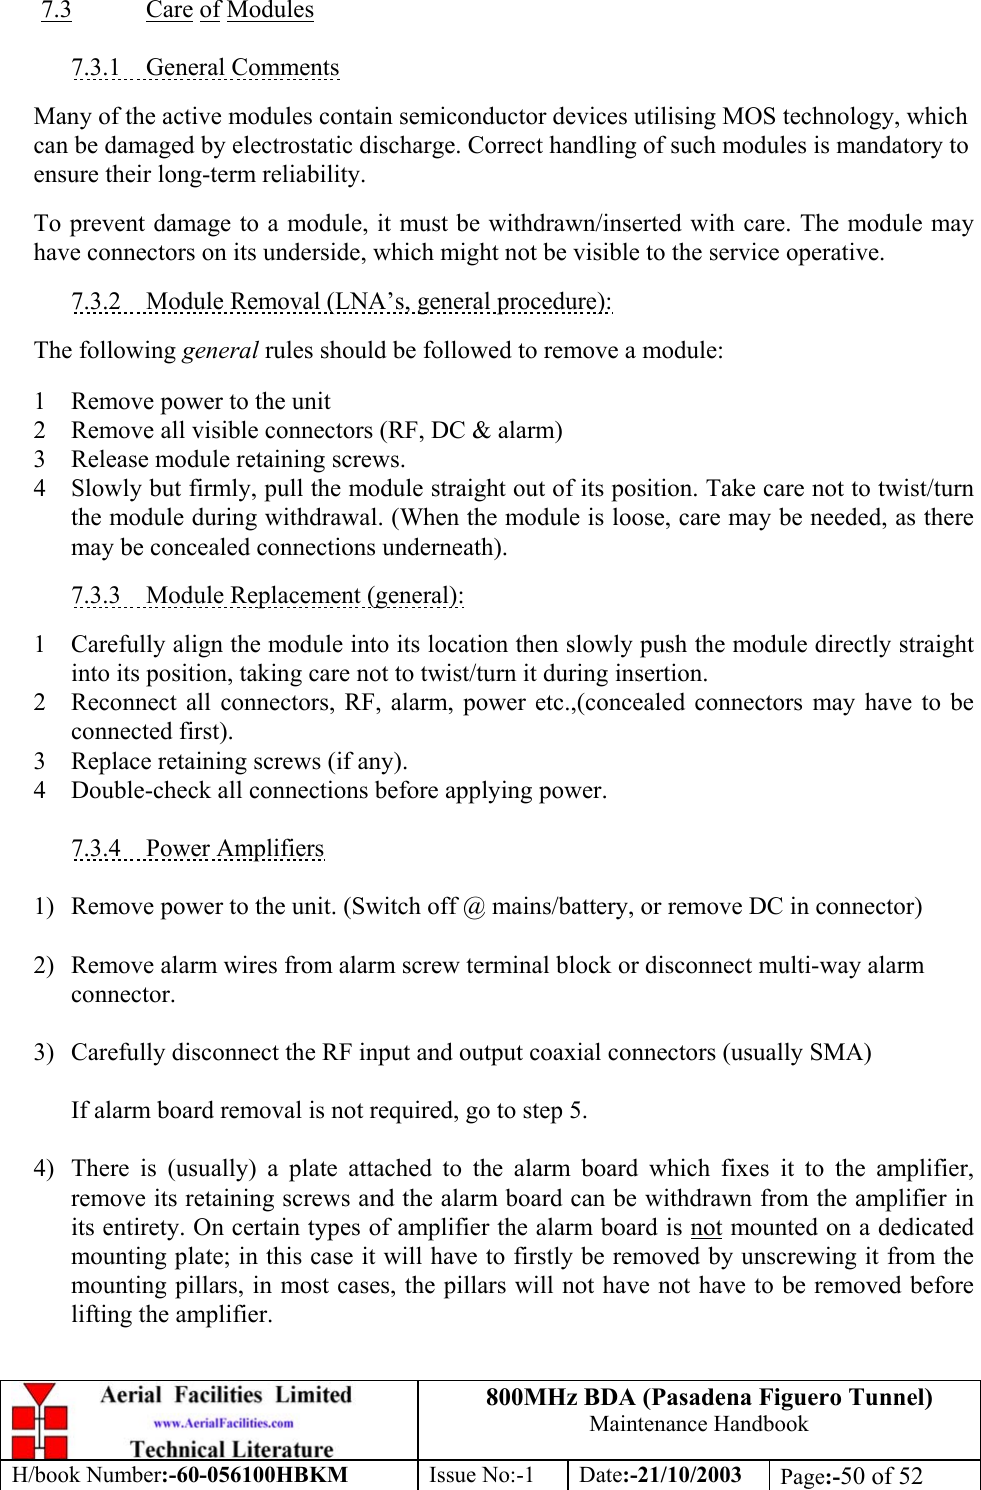 800MHz BDA (Pasadena Figuero Tunnel)Maintenance HandbookH/book Number:-60-056100HBKM Issue No:-1 Date:-21/10/2003 Page:-50 of 527.3 Care of Modules7.3.1    General CommentsMany of the active modules contain semiconductor devices utilising MOS technology, whichcan be damaged by electrostatic discharge. Correct handling of such modules is mandatory toensure their long-term reliability.To prevent damage to a module, it must be withdrawn/inserted with care. The module mayhave connectors on its underside, which might not be visible to the service operative.7.3.2    Module Removal (LNA’s, general procedure):The following general rules should be followed to remove a module:1 Remove power to the unit2 Remove all visible connectors (RF, DC &amp; alarm)3 Release module retaining screws.4 Slowly but firmly, pull the module straight out of its position. Take care not to twist/turnthe module during withdrawal. (When the module is loose, care may be needed, as theremay be concealed connections underneath).7.3.3    Module Replacement (general):1 Carefully align the module into its location then slowly push the module directly straightinto its position, taking care not to twist/turn it during insertion.2 Reconnect all connectors, RF, alarm, power etc.,(concealed connectors may have to beconnected first).3 Replace retaining screws (if any).4 Double-check all connections before applying power.7.3.4    Power Amplifiers1) Remove power to the unit. (Switch off @ mains/battery, or remove DC in connector)2) Remove alarm wires from alarm screw terminal block or disconnect multi-way alarmconnector.3) Carefully disconnect the RF input and output coaxial connectors (usually SMA)If alarm board removal is not required, go to step 5.4) There is (usually) a plate attached to the alarm board which fixes it to the amplifier,remove its retaining screws and the alarm board can be withdrawn from the amplifier inits entirety. On certain types of amplifier the alarm board is not mounted on a dedicatedmounting plate; in this case it will have to firstly be removed by unscrewing it from themounting pillars, in most cases, the pillars will not have not have to be removed beforelifting the amplifier.